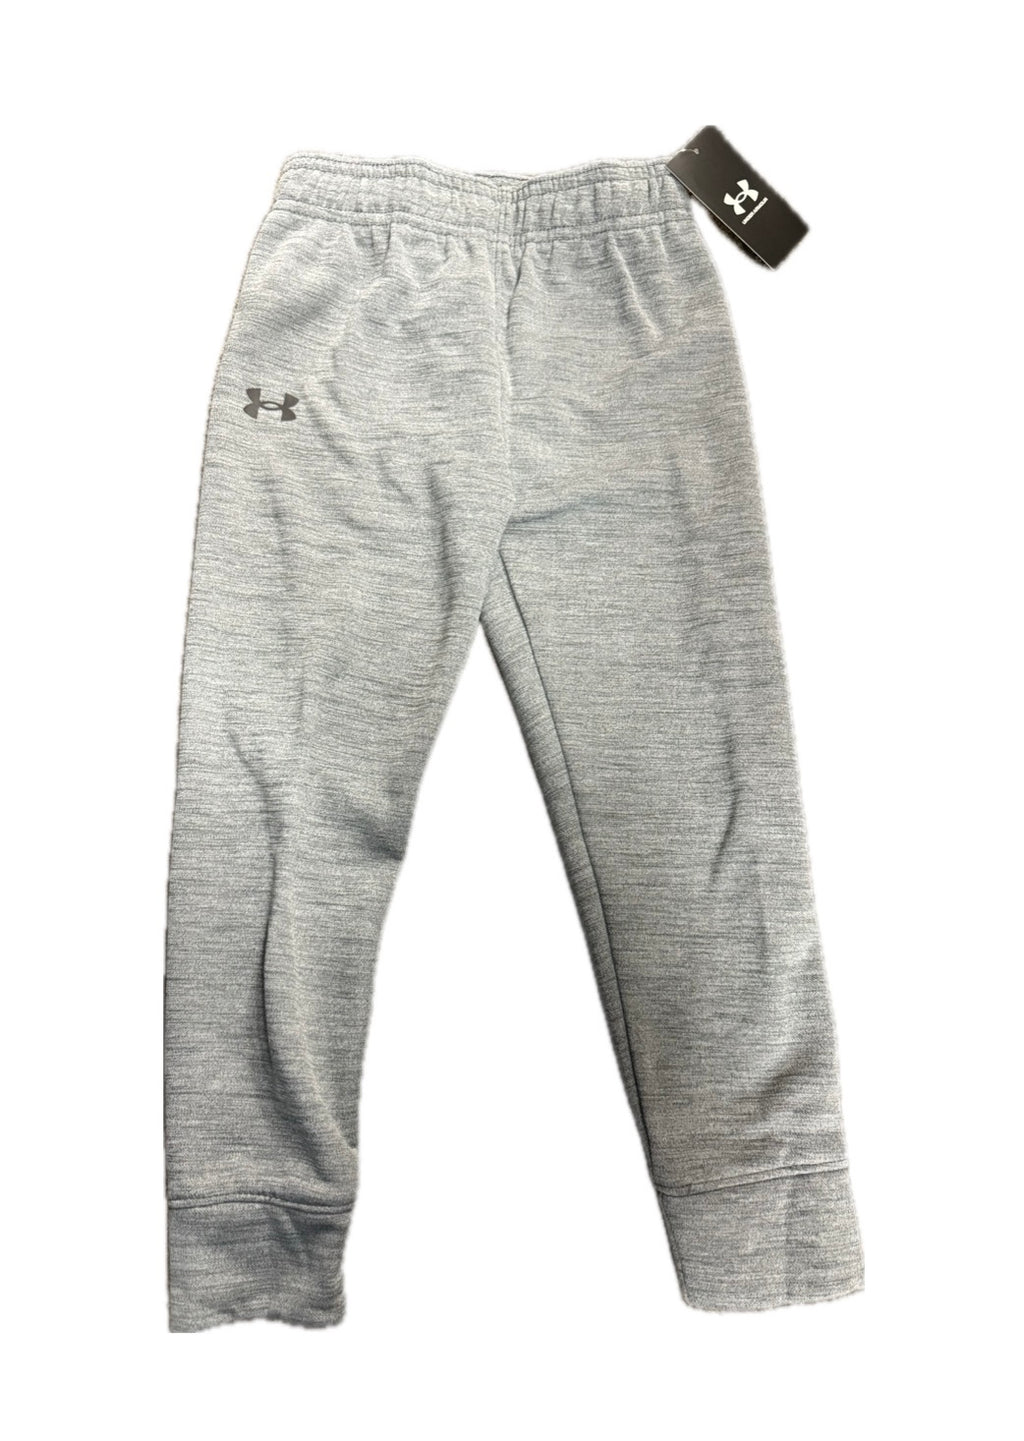 Under Armour Pitch Gray Jogger Pant